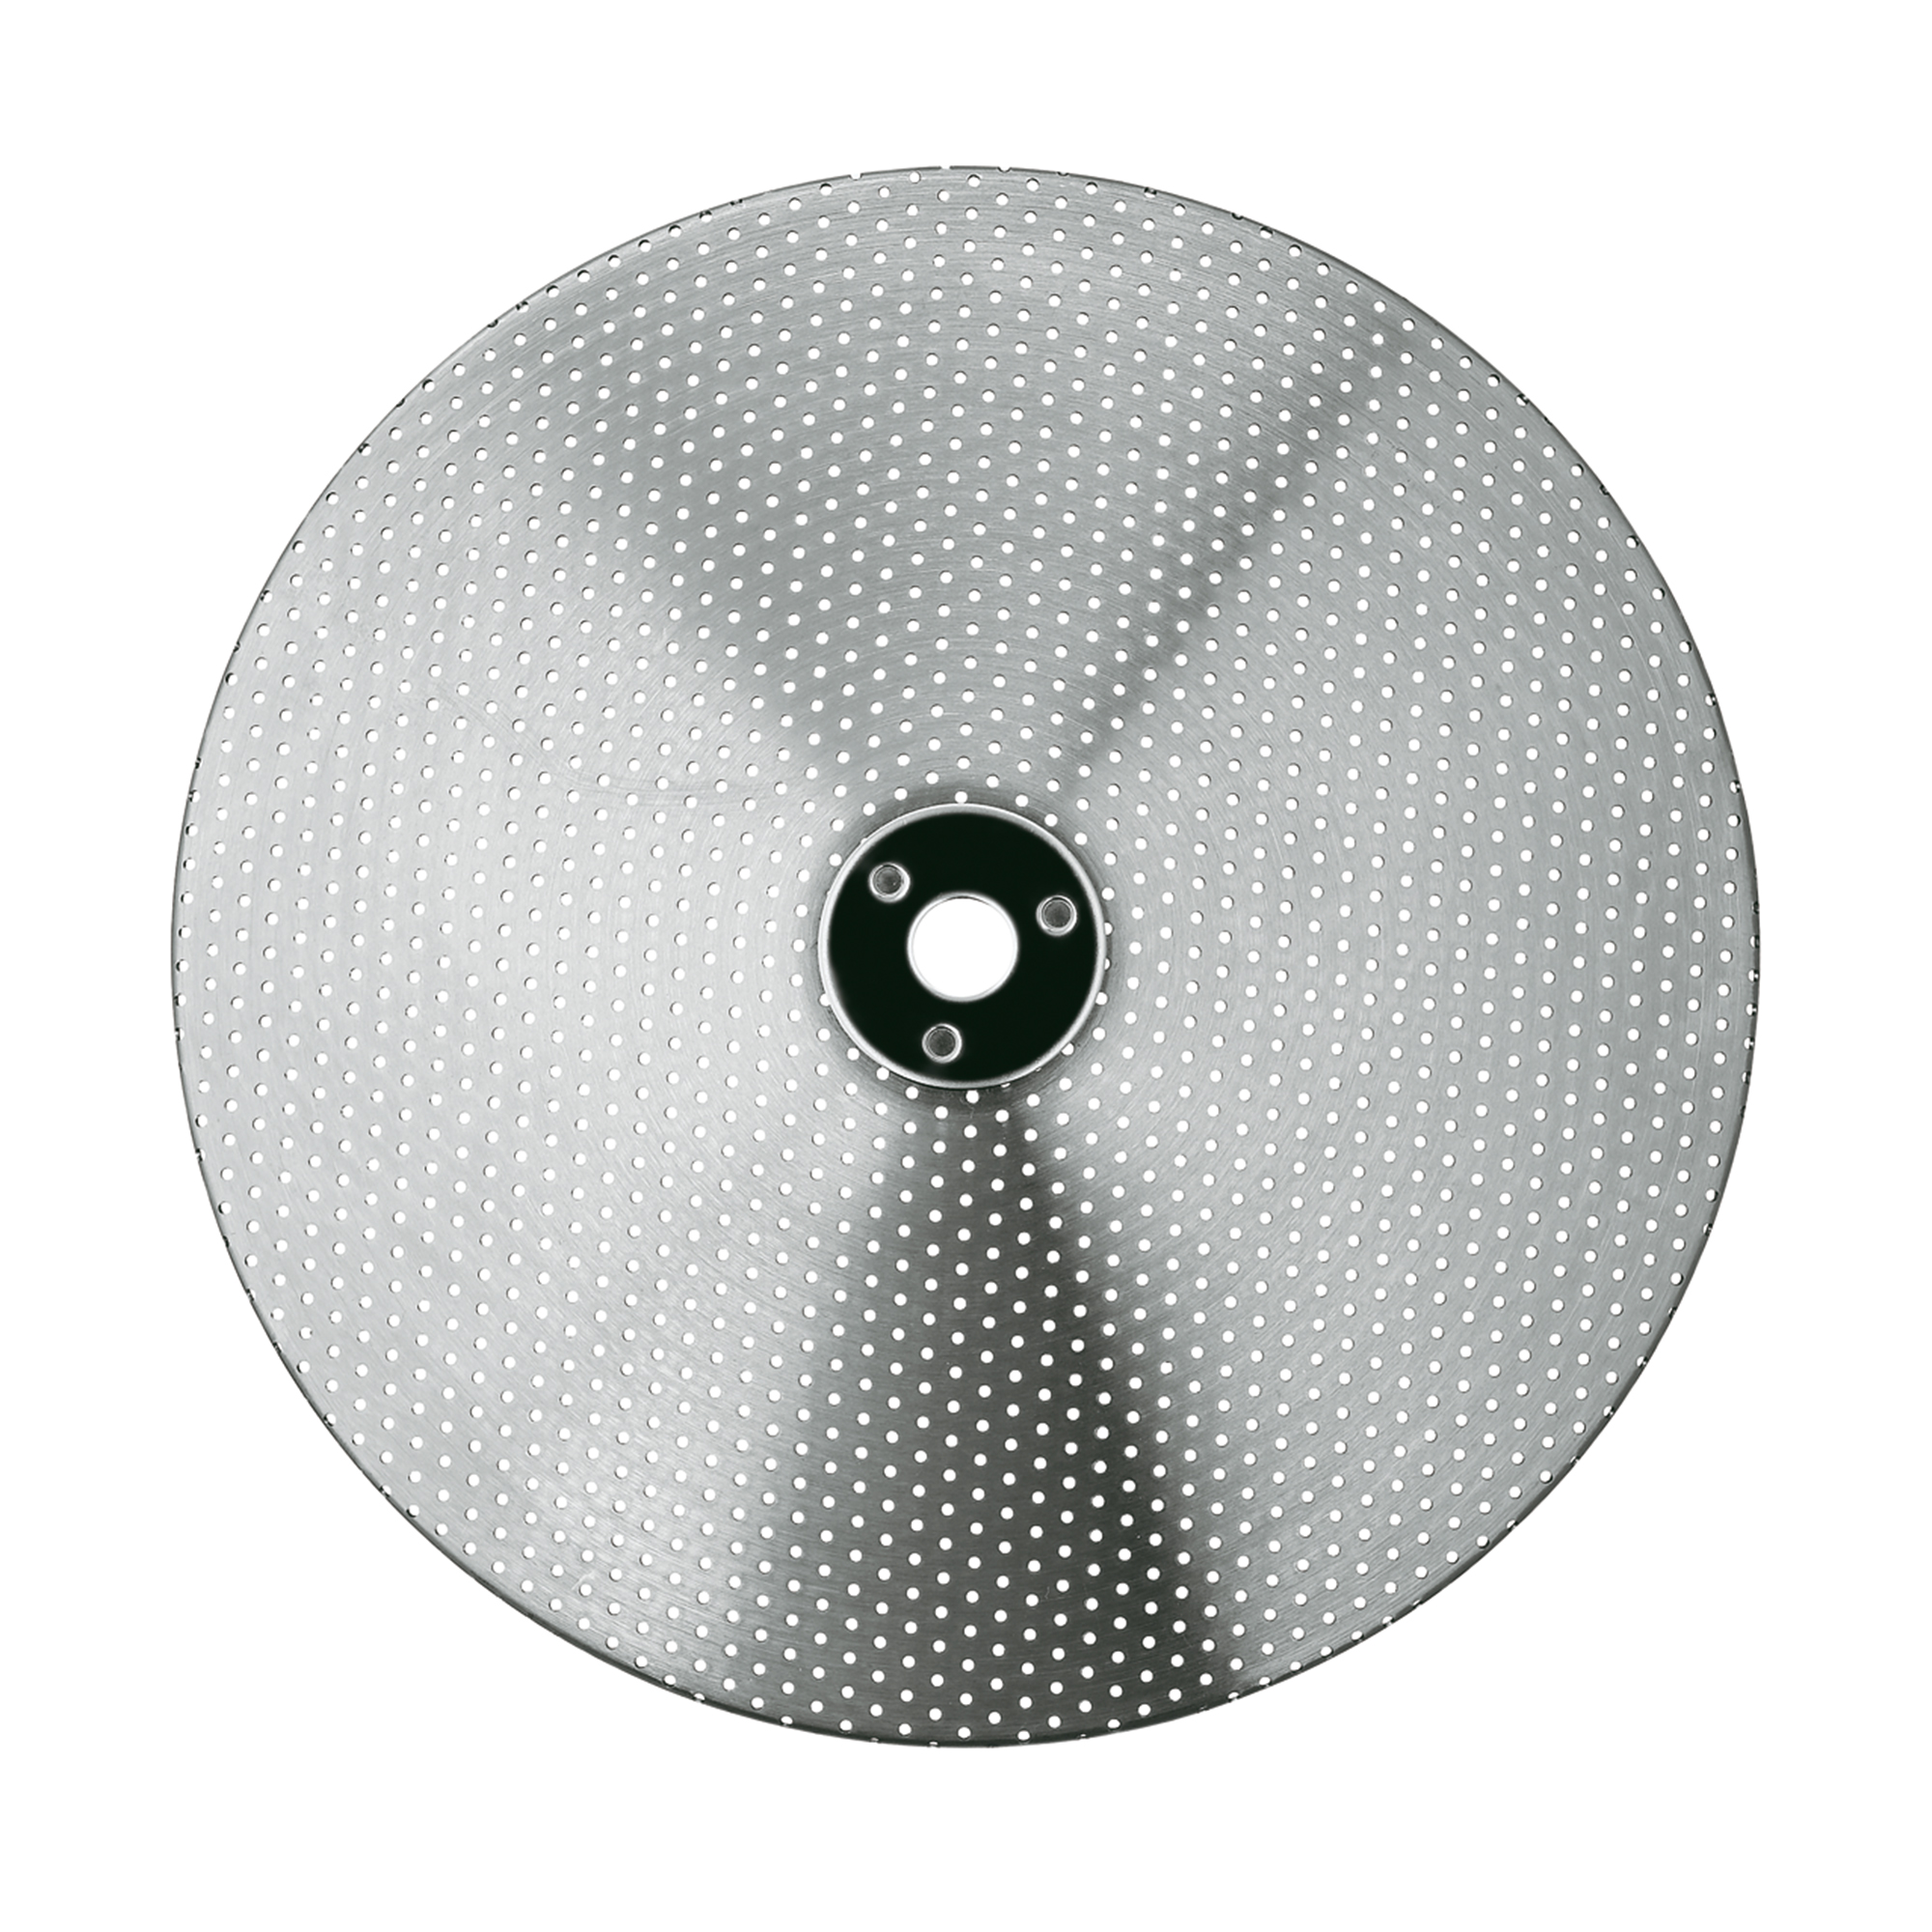 Sieve Disc 1 mm/0.04 in. (for Item no. 16251 & 16252)